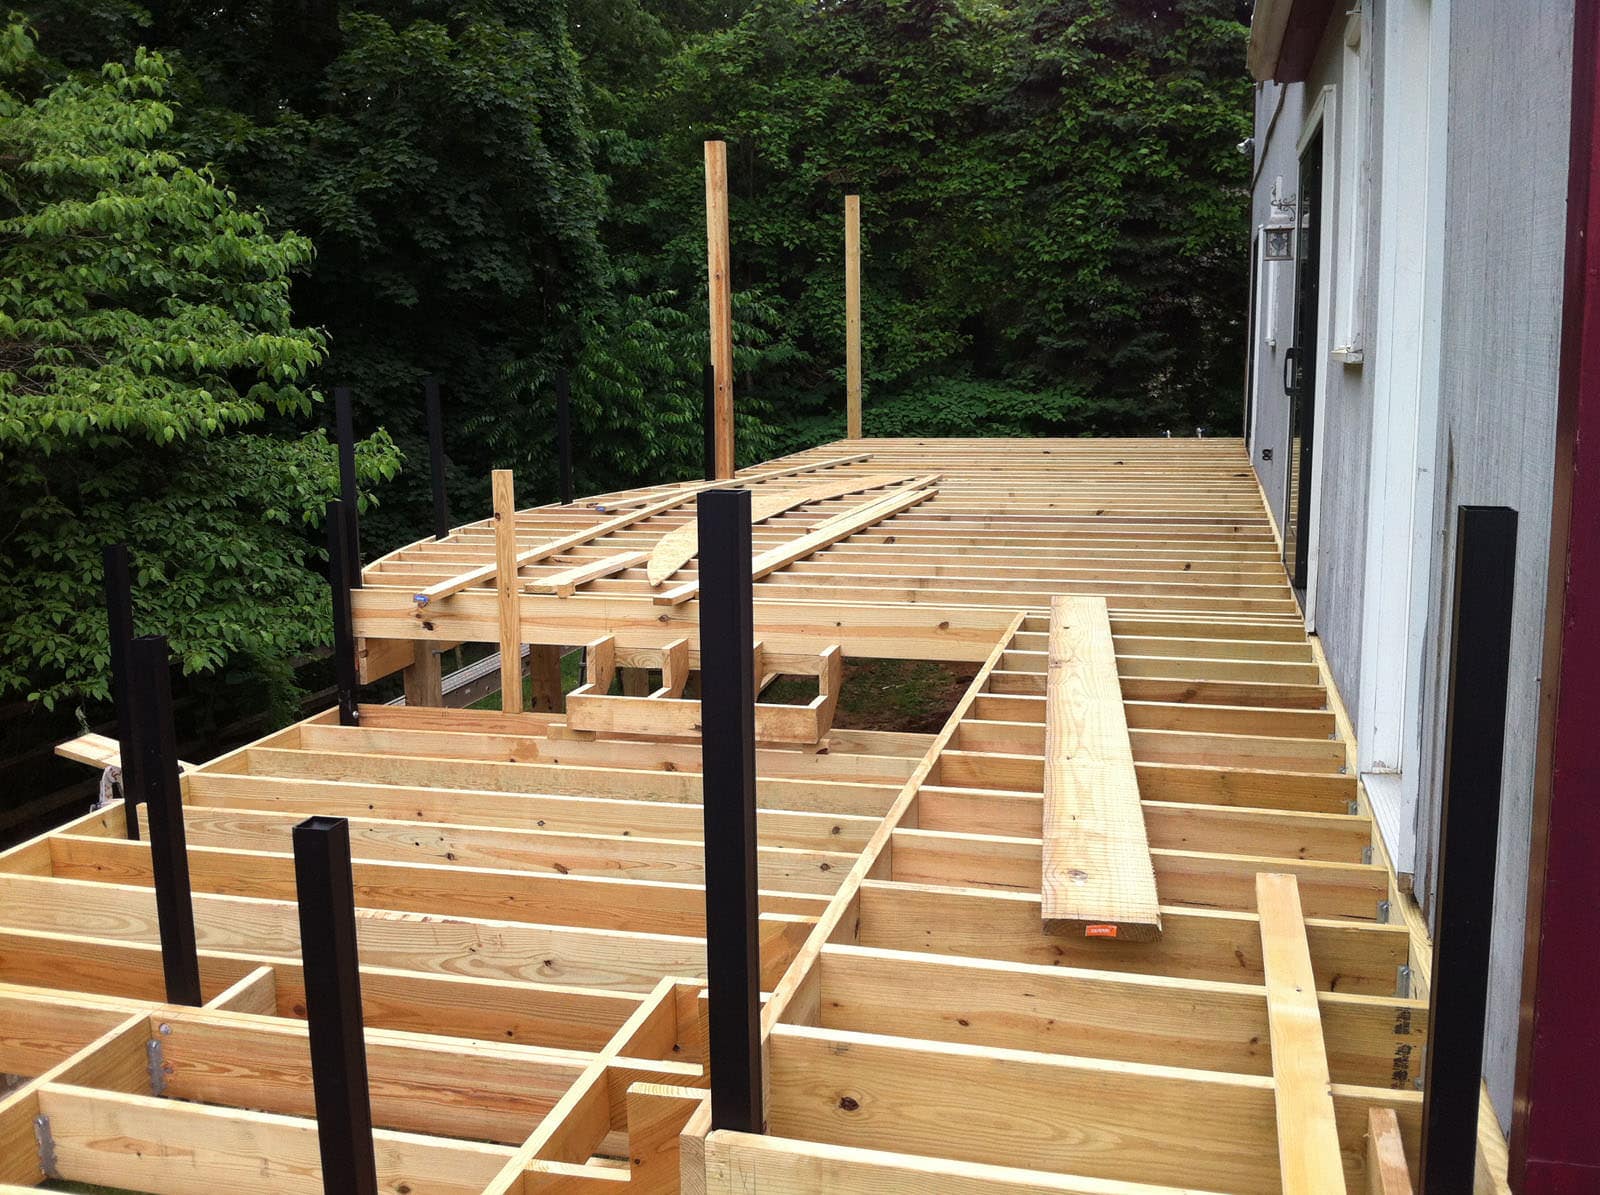 With the old pressure treated deck removed, the new deck framing started right away!